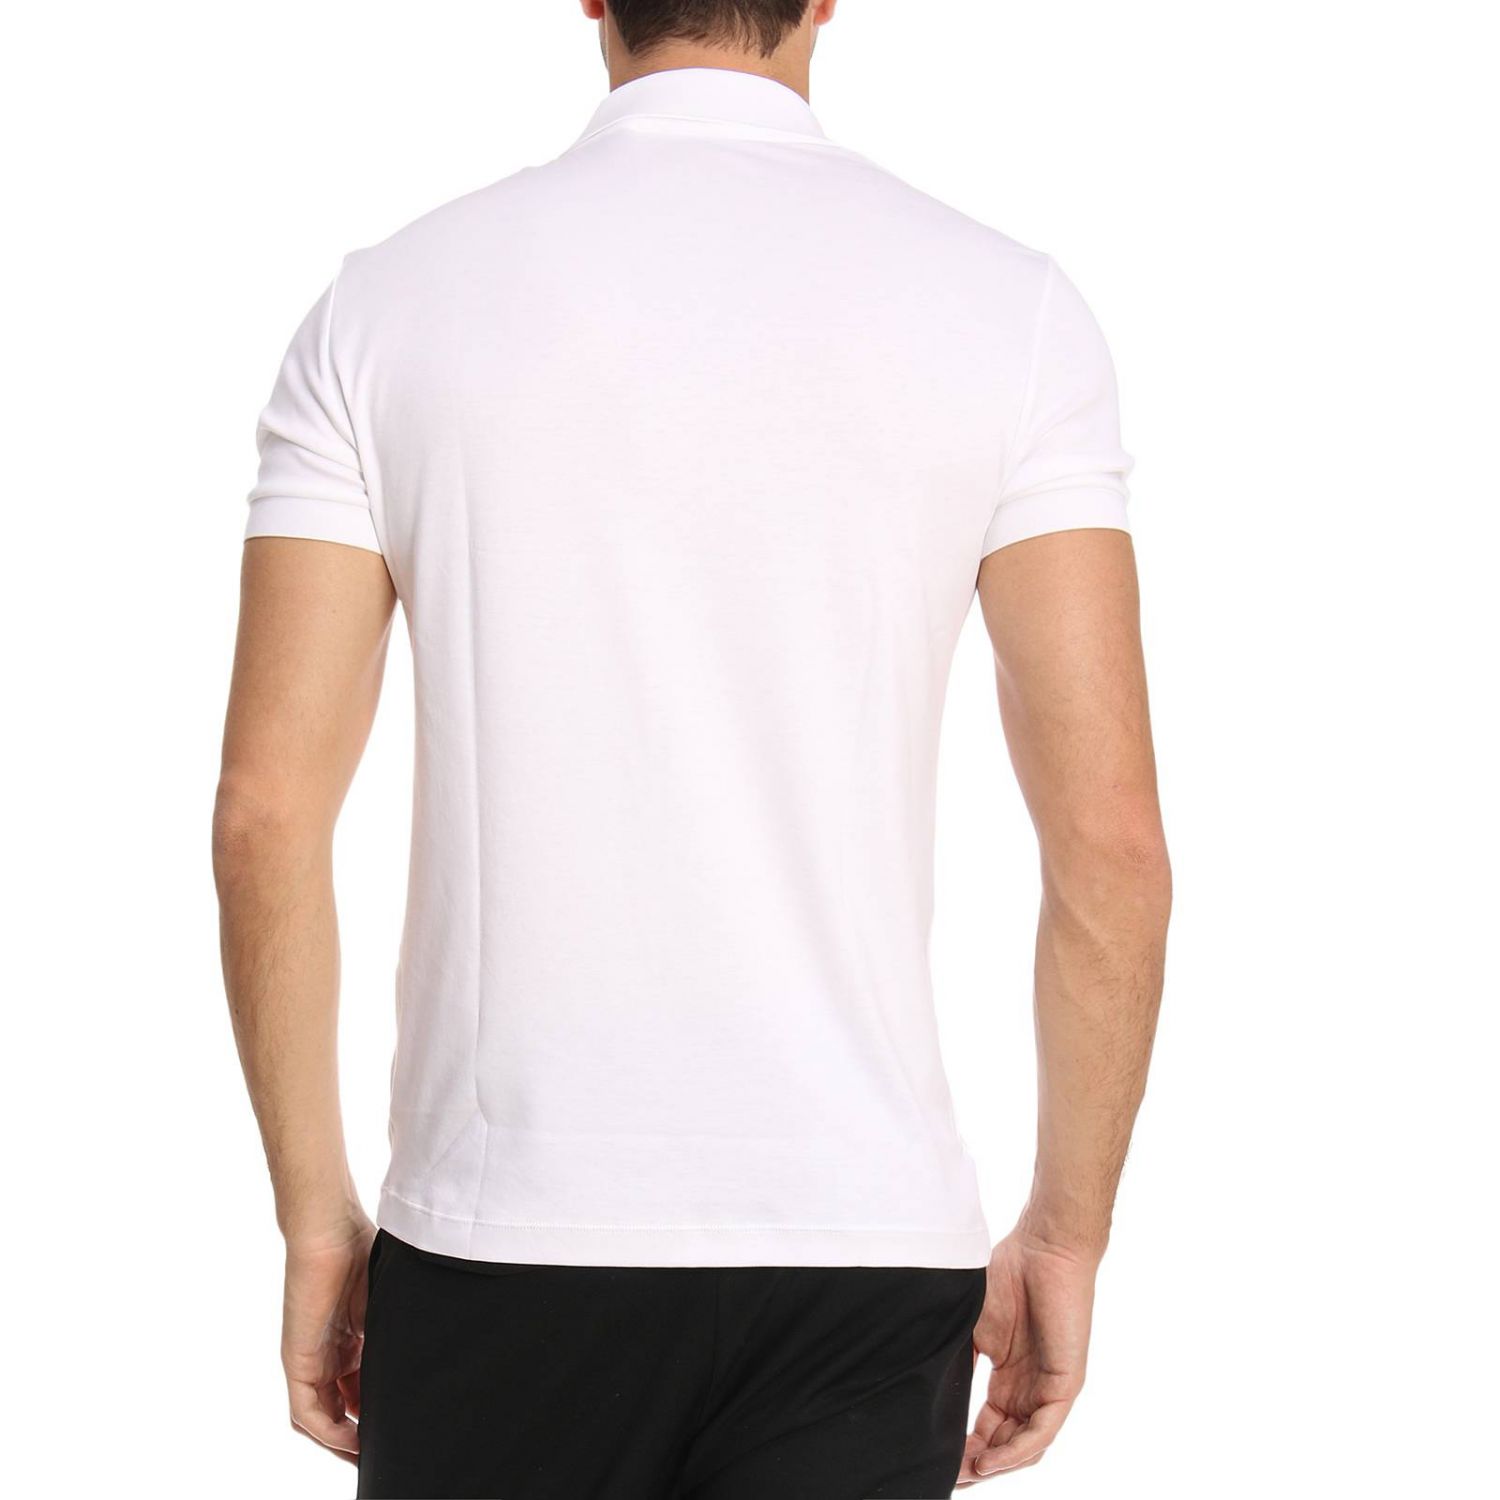 LACOSTE: T-shirt men - White | T-Shirt Lacoste DH2050 GIGLIO.COM